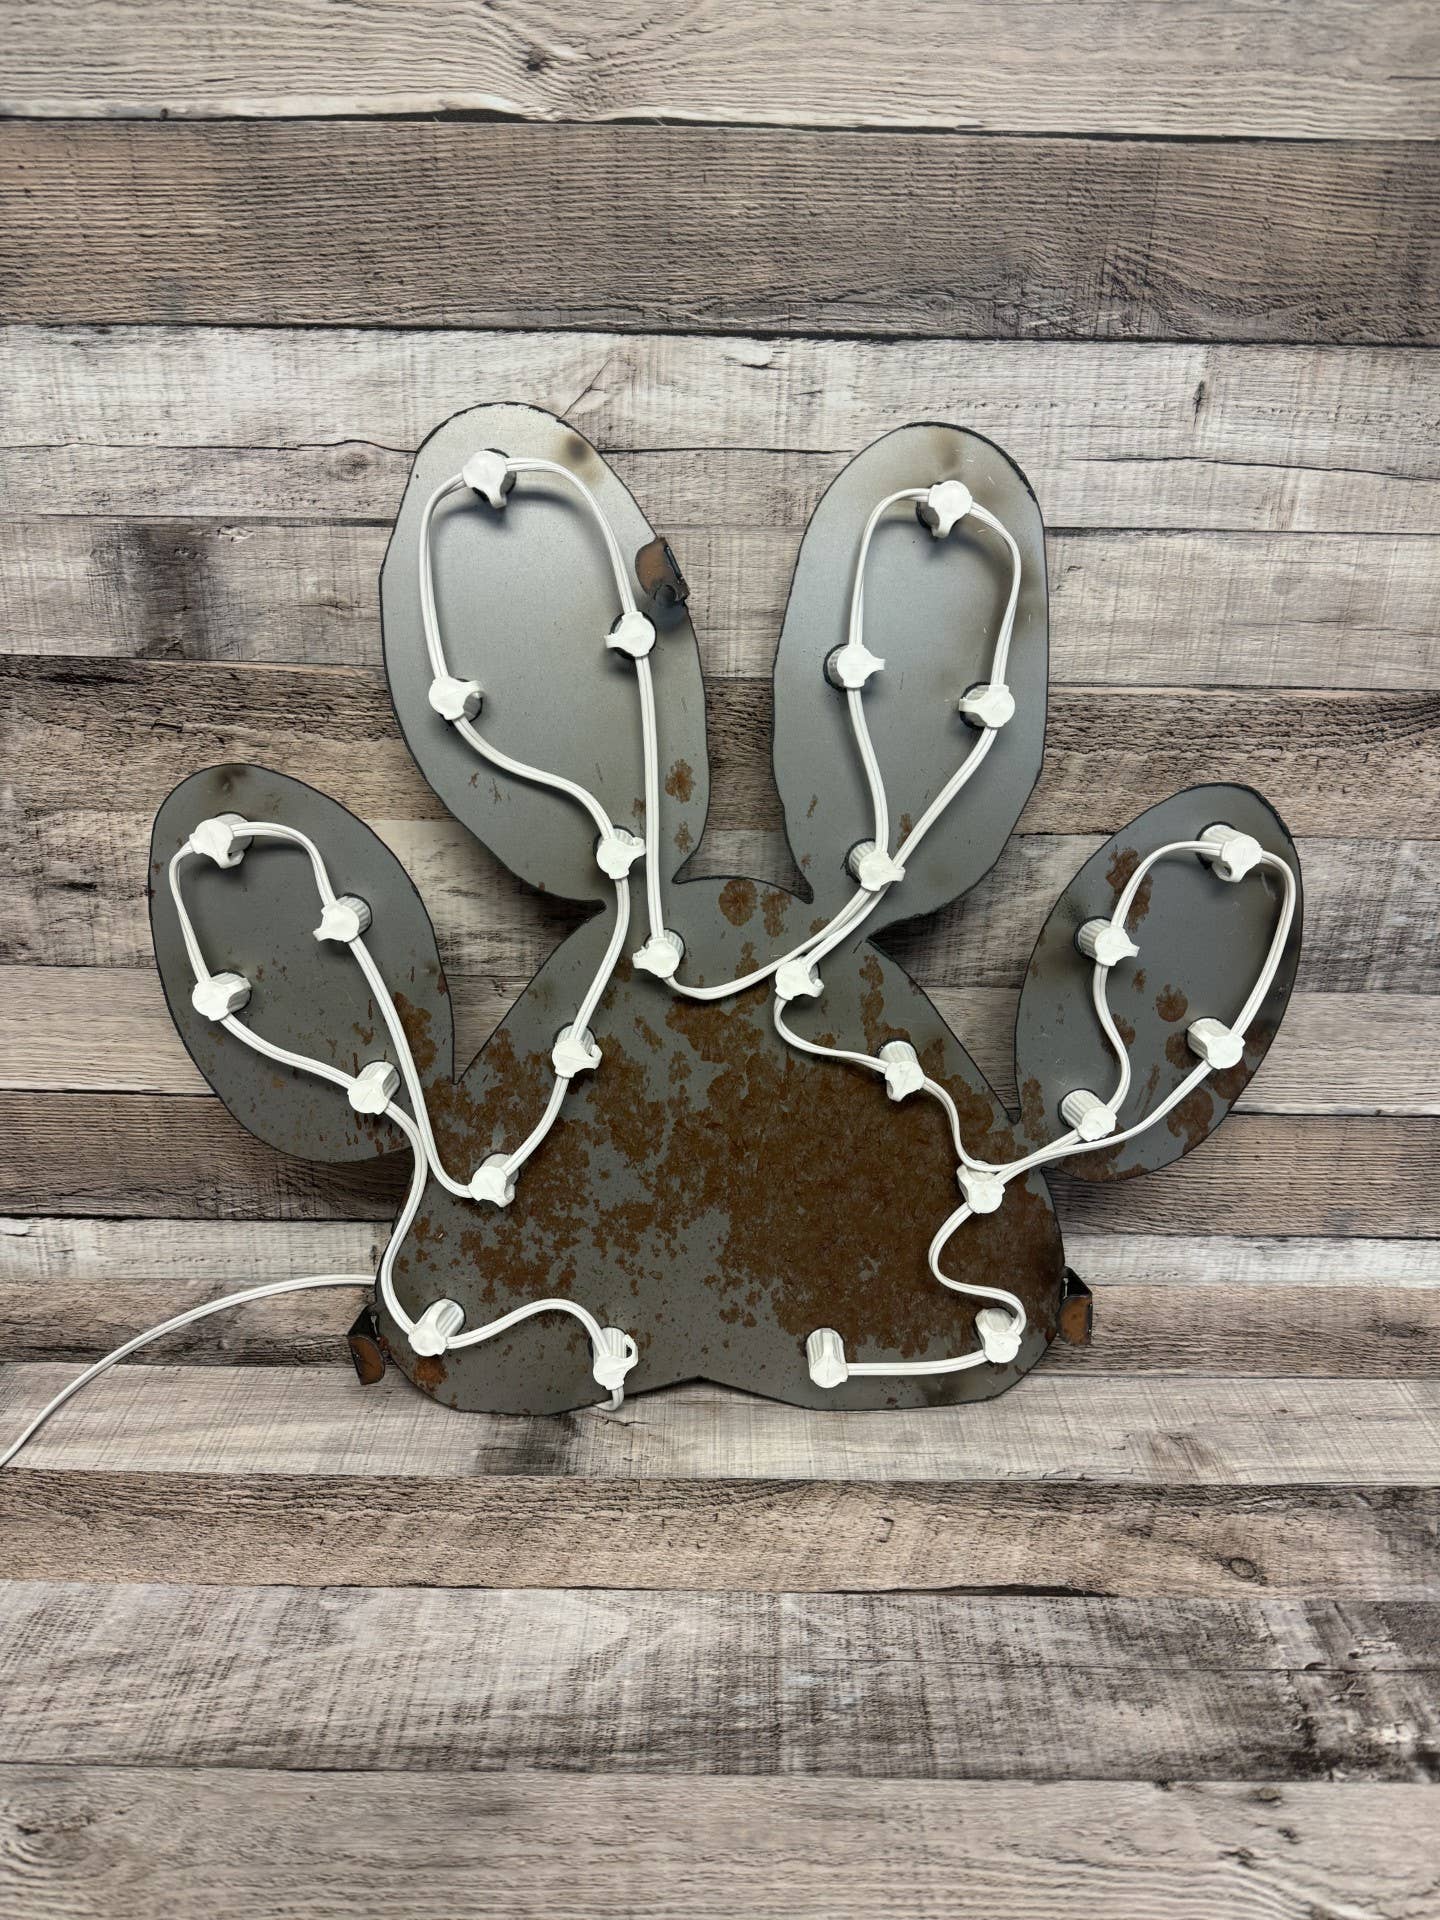 Paw Print Marquee Lighted Metal Pet Sign Retro Inspired Sign